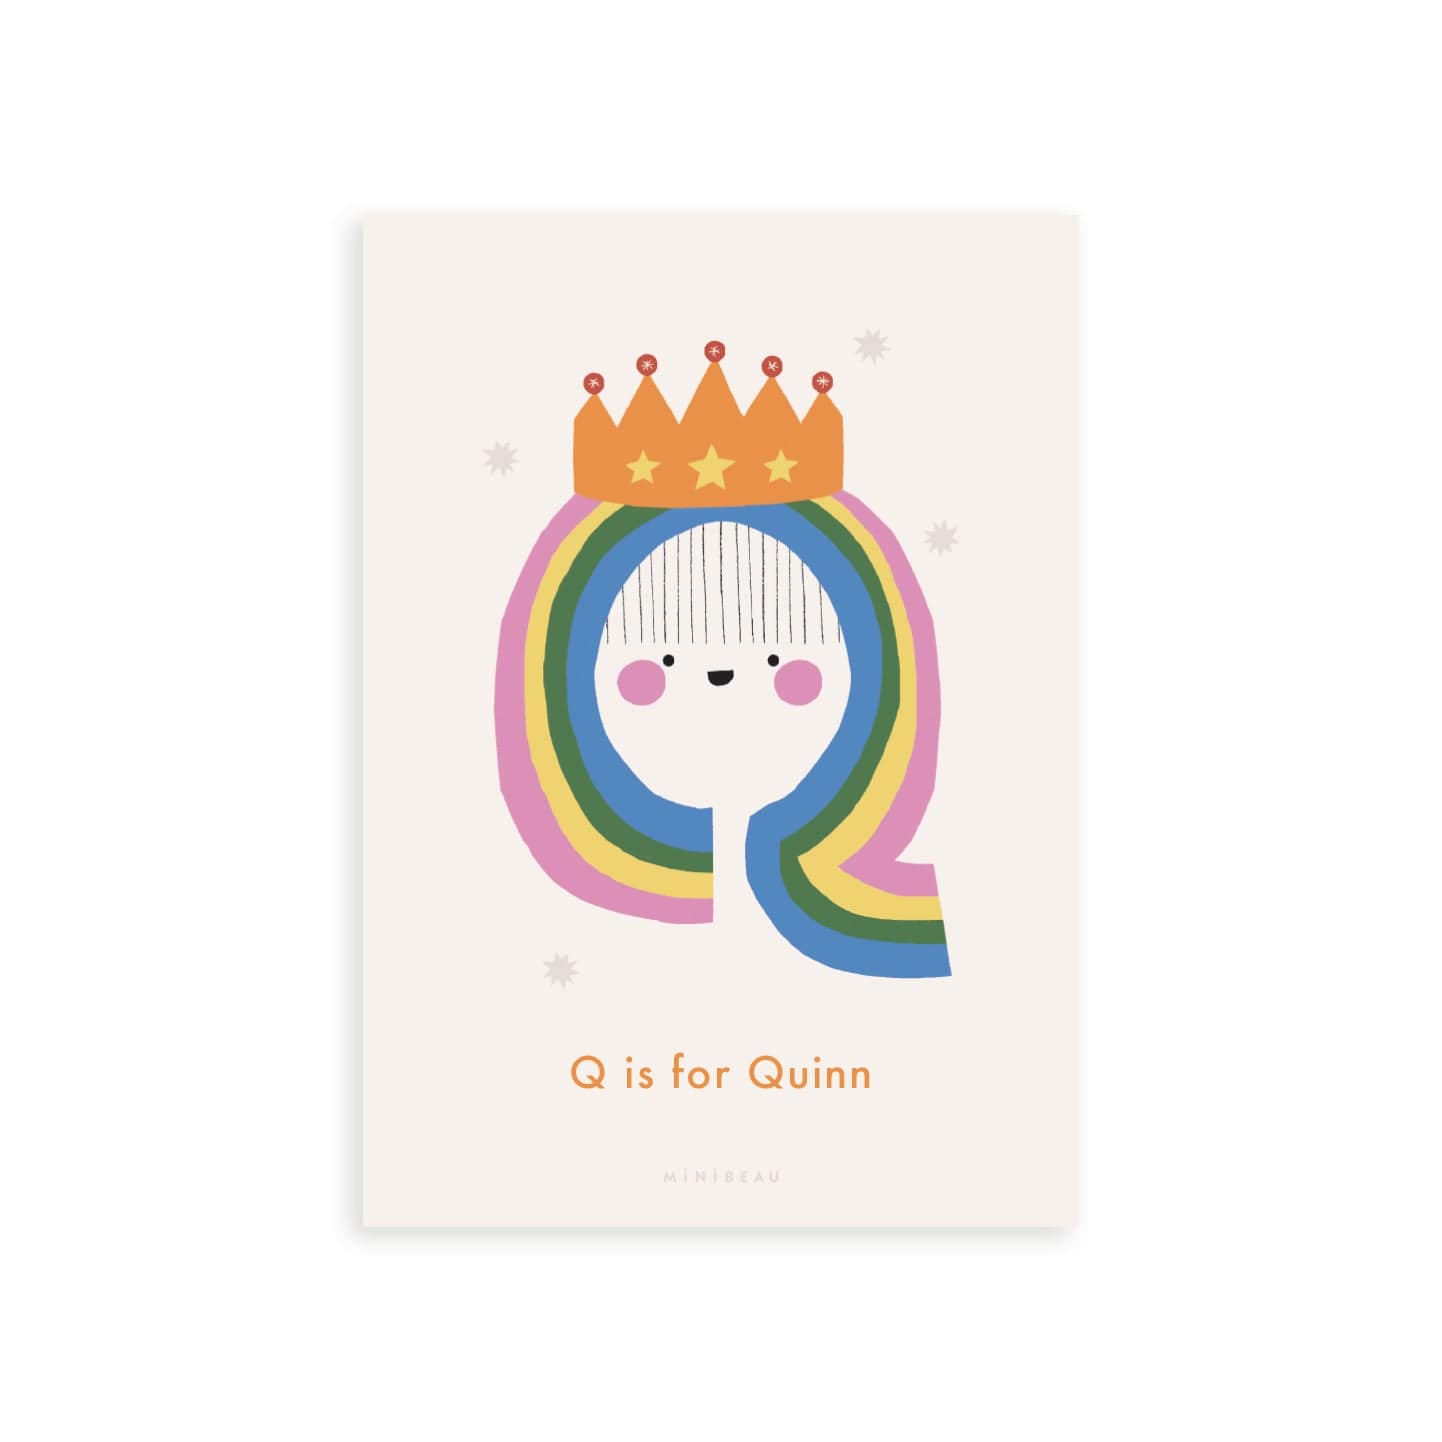 Personalised Happy Alphabet Q in the shape of a rainbow Queen with a smiley face wearing a crown. Cream background.